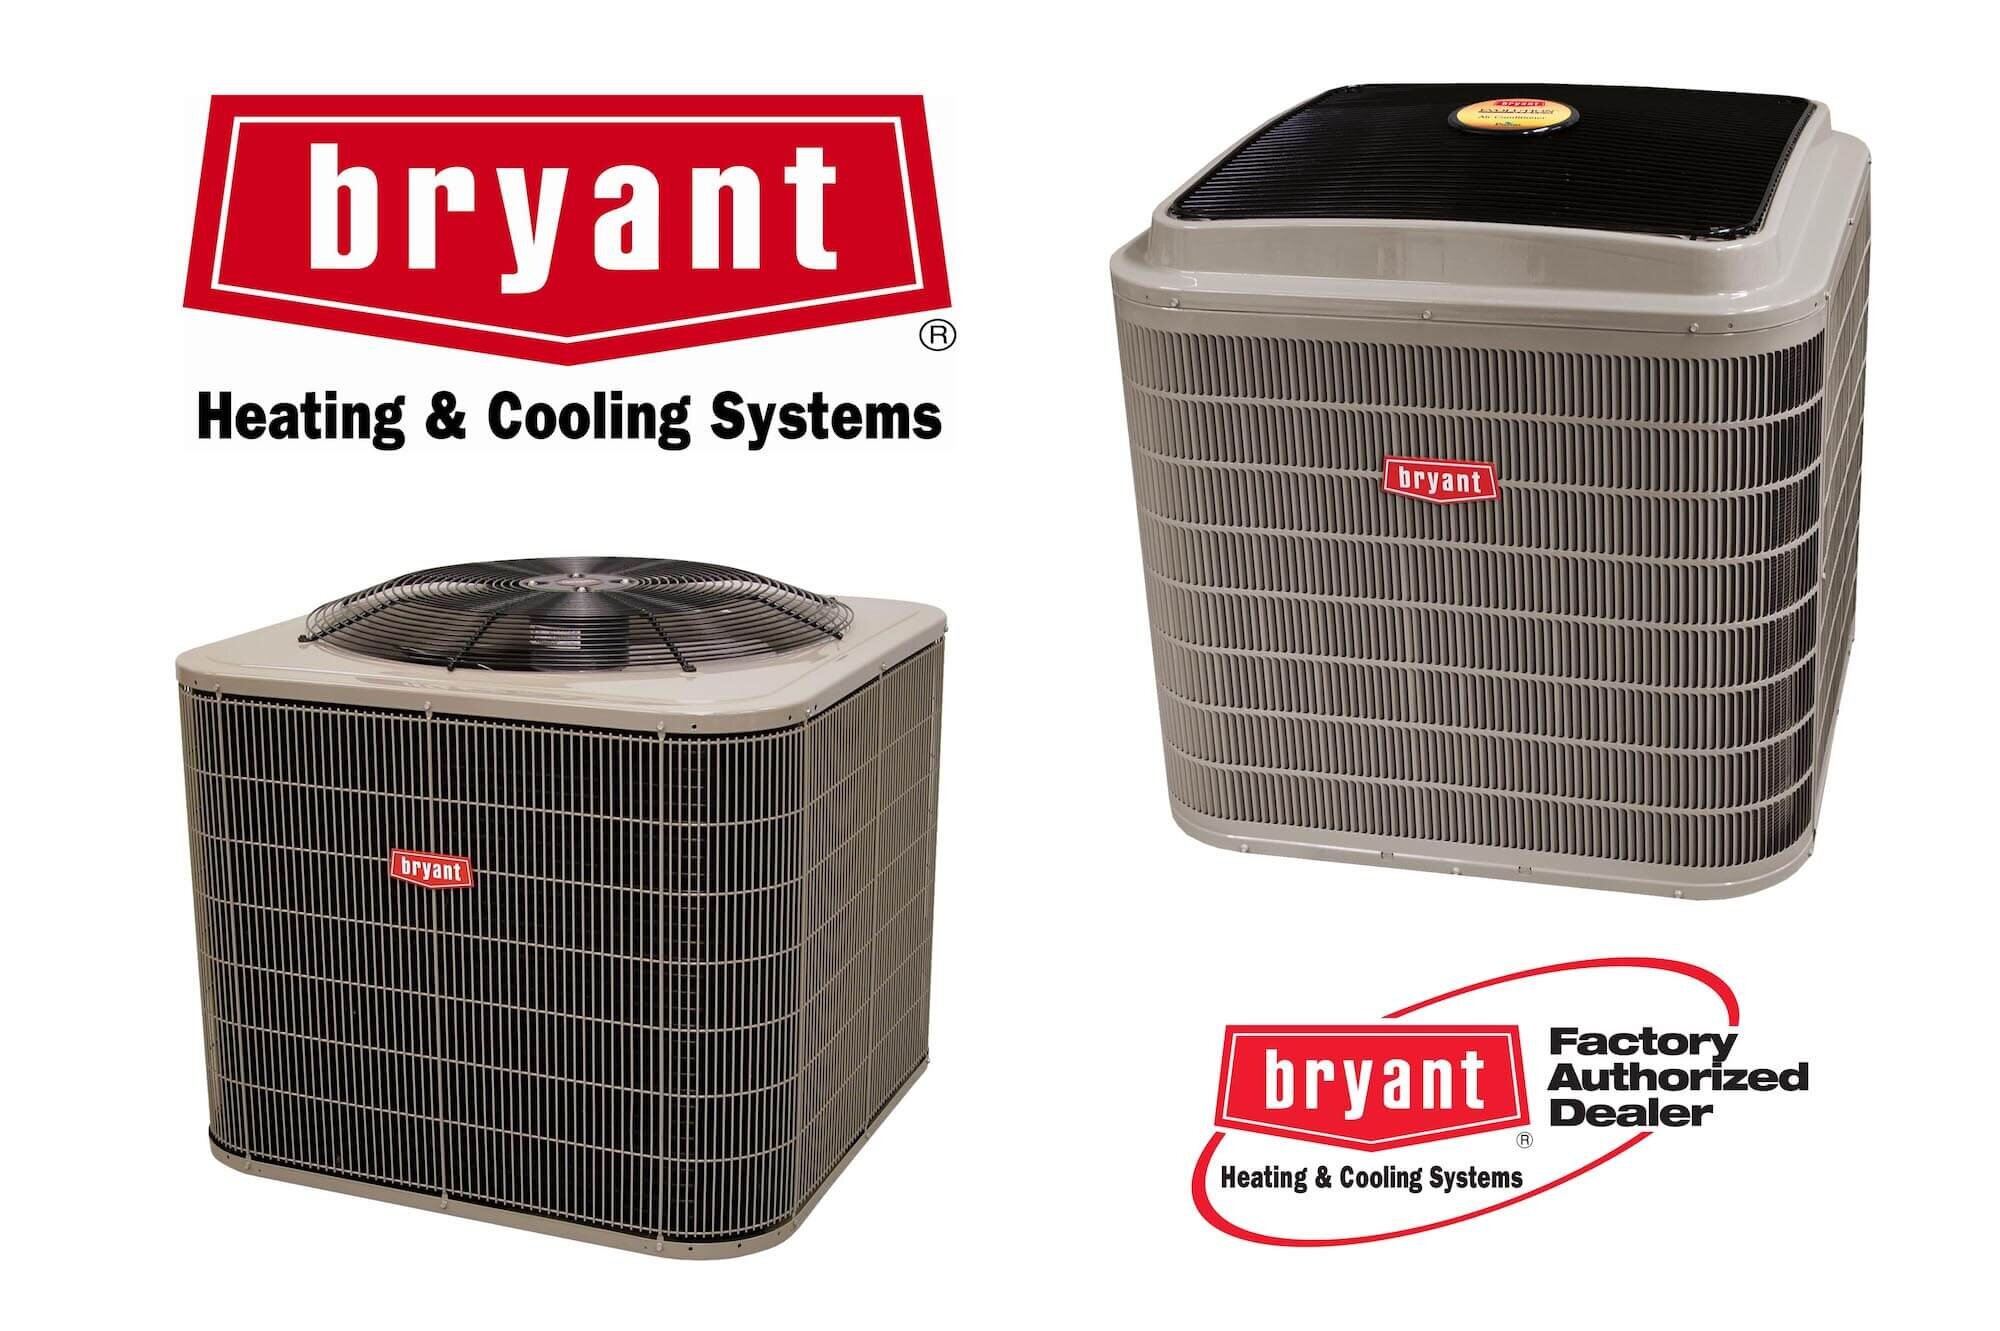 Bryant Offers some of the best air conditioning systems for Mid-Michigan homes.